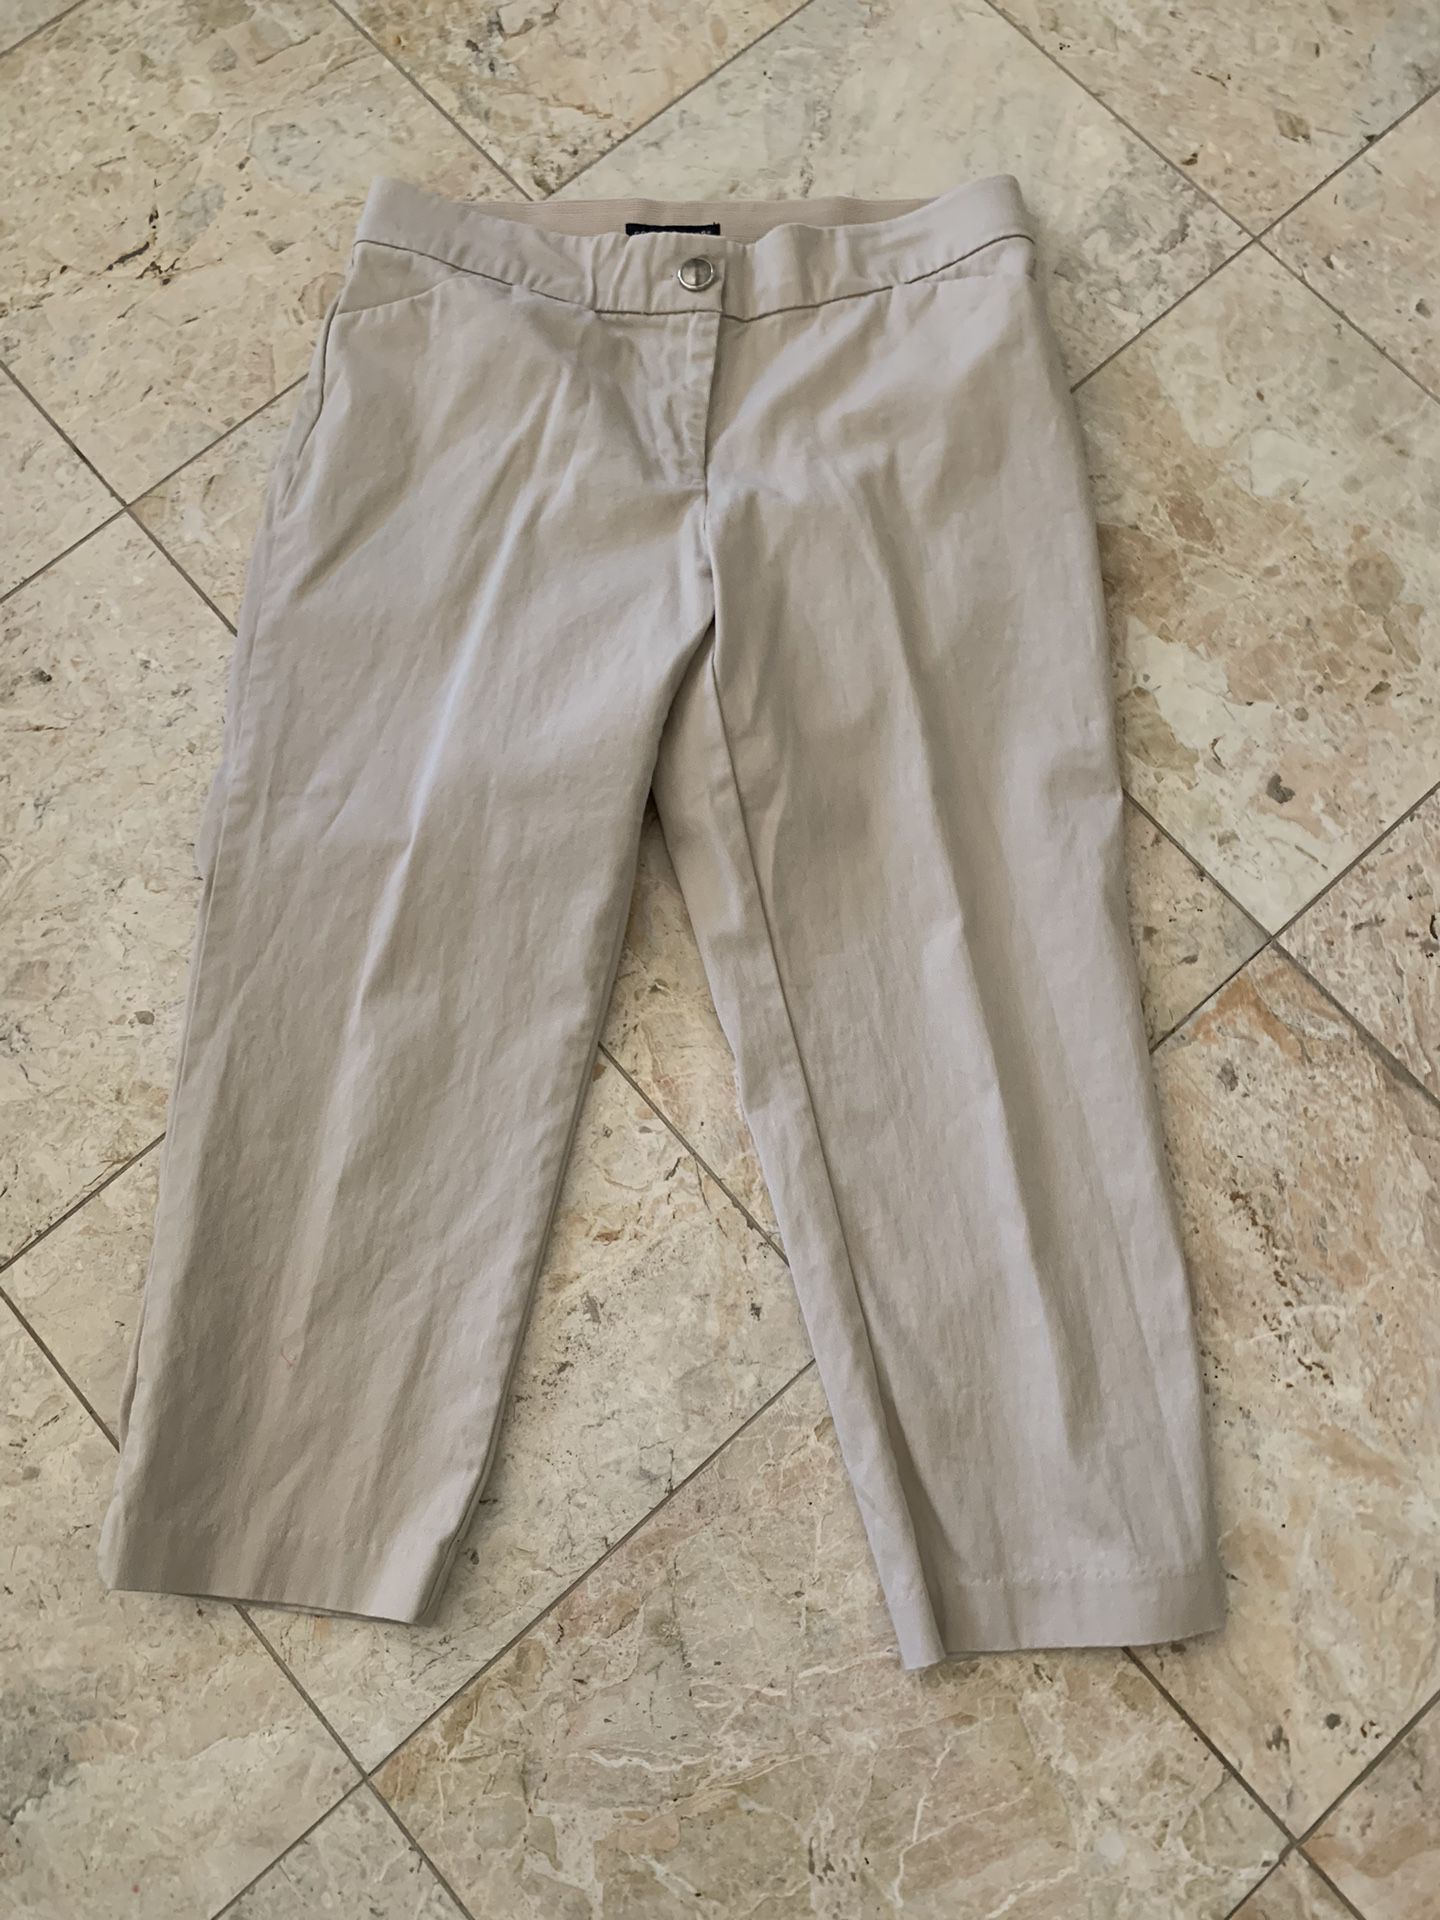 Counterparts Khaki Capri Pants Womens Stretch Elastic Waist Size 8 for Sale  in Carlsbad, CA - OfferUp